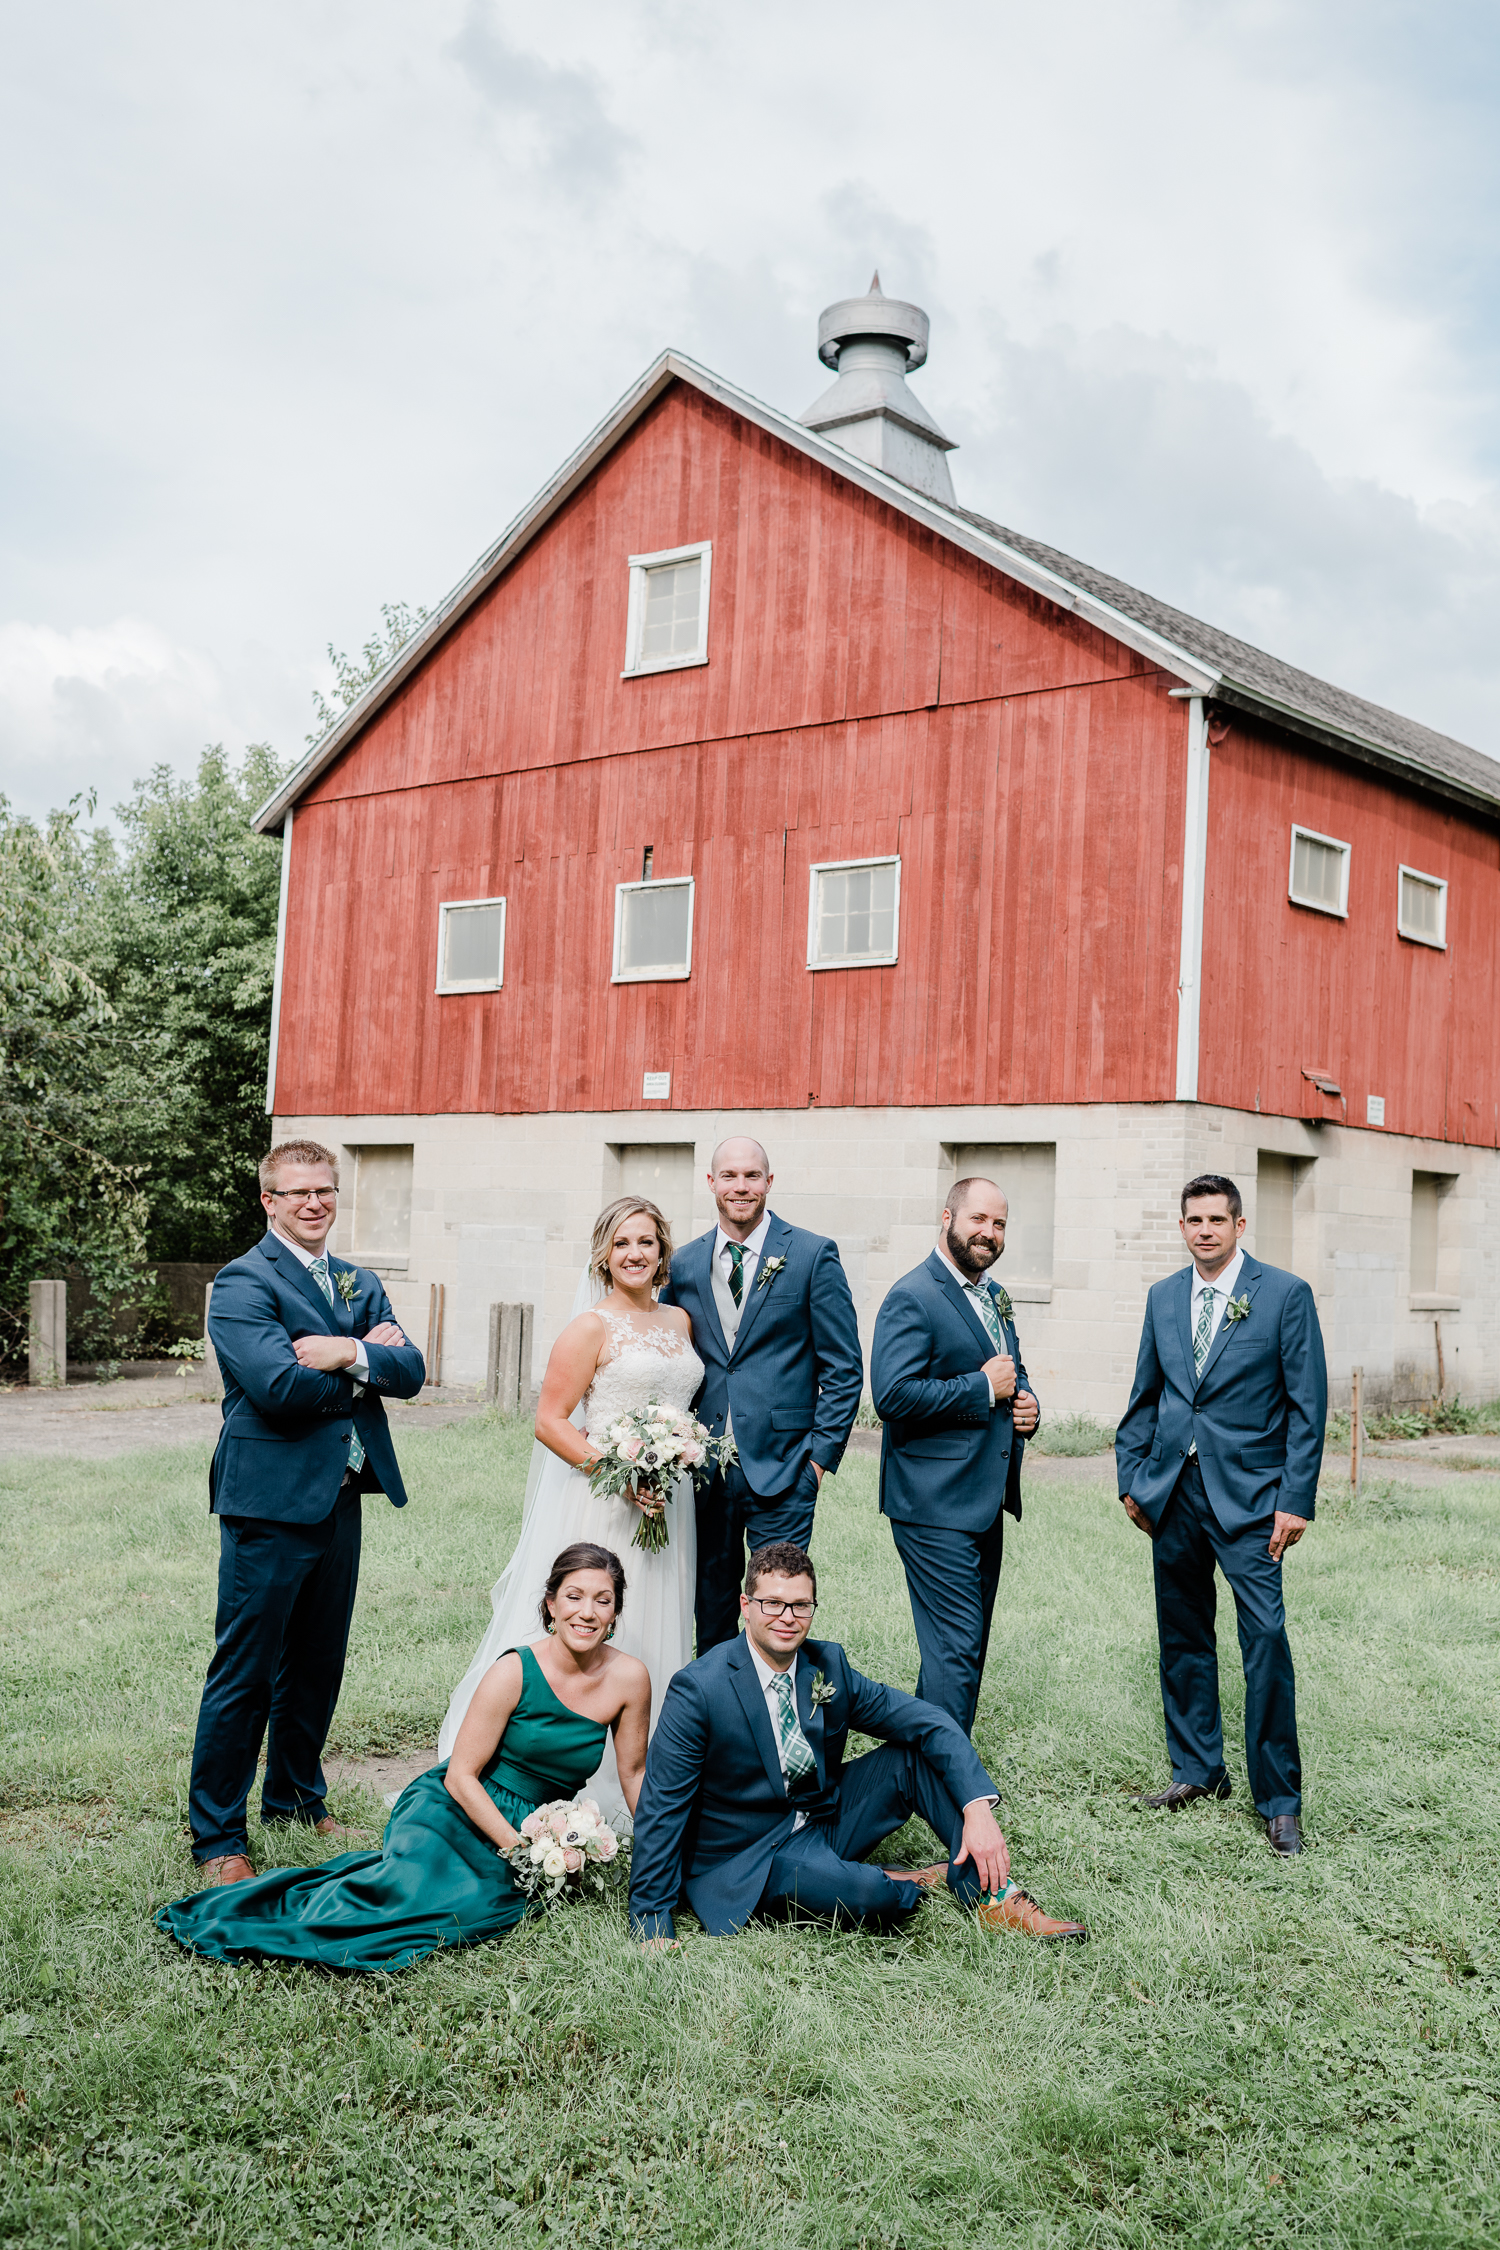 Bridal party outside the red barn